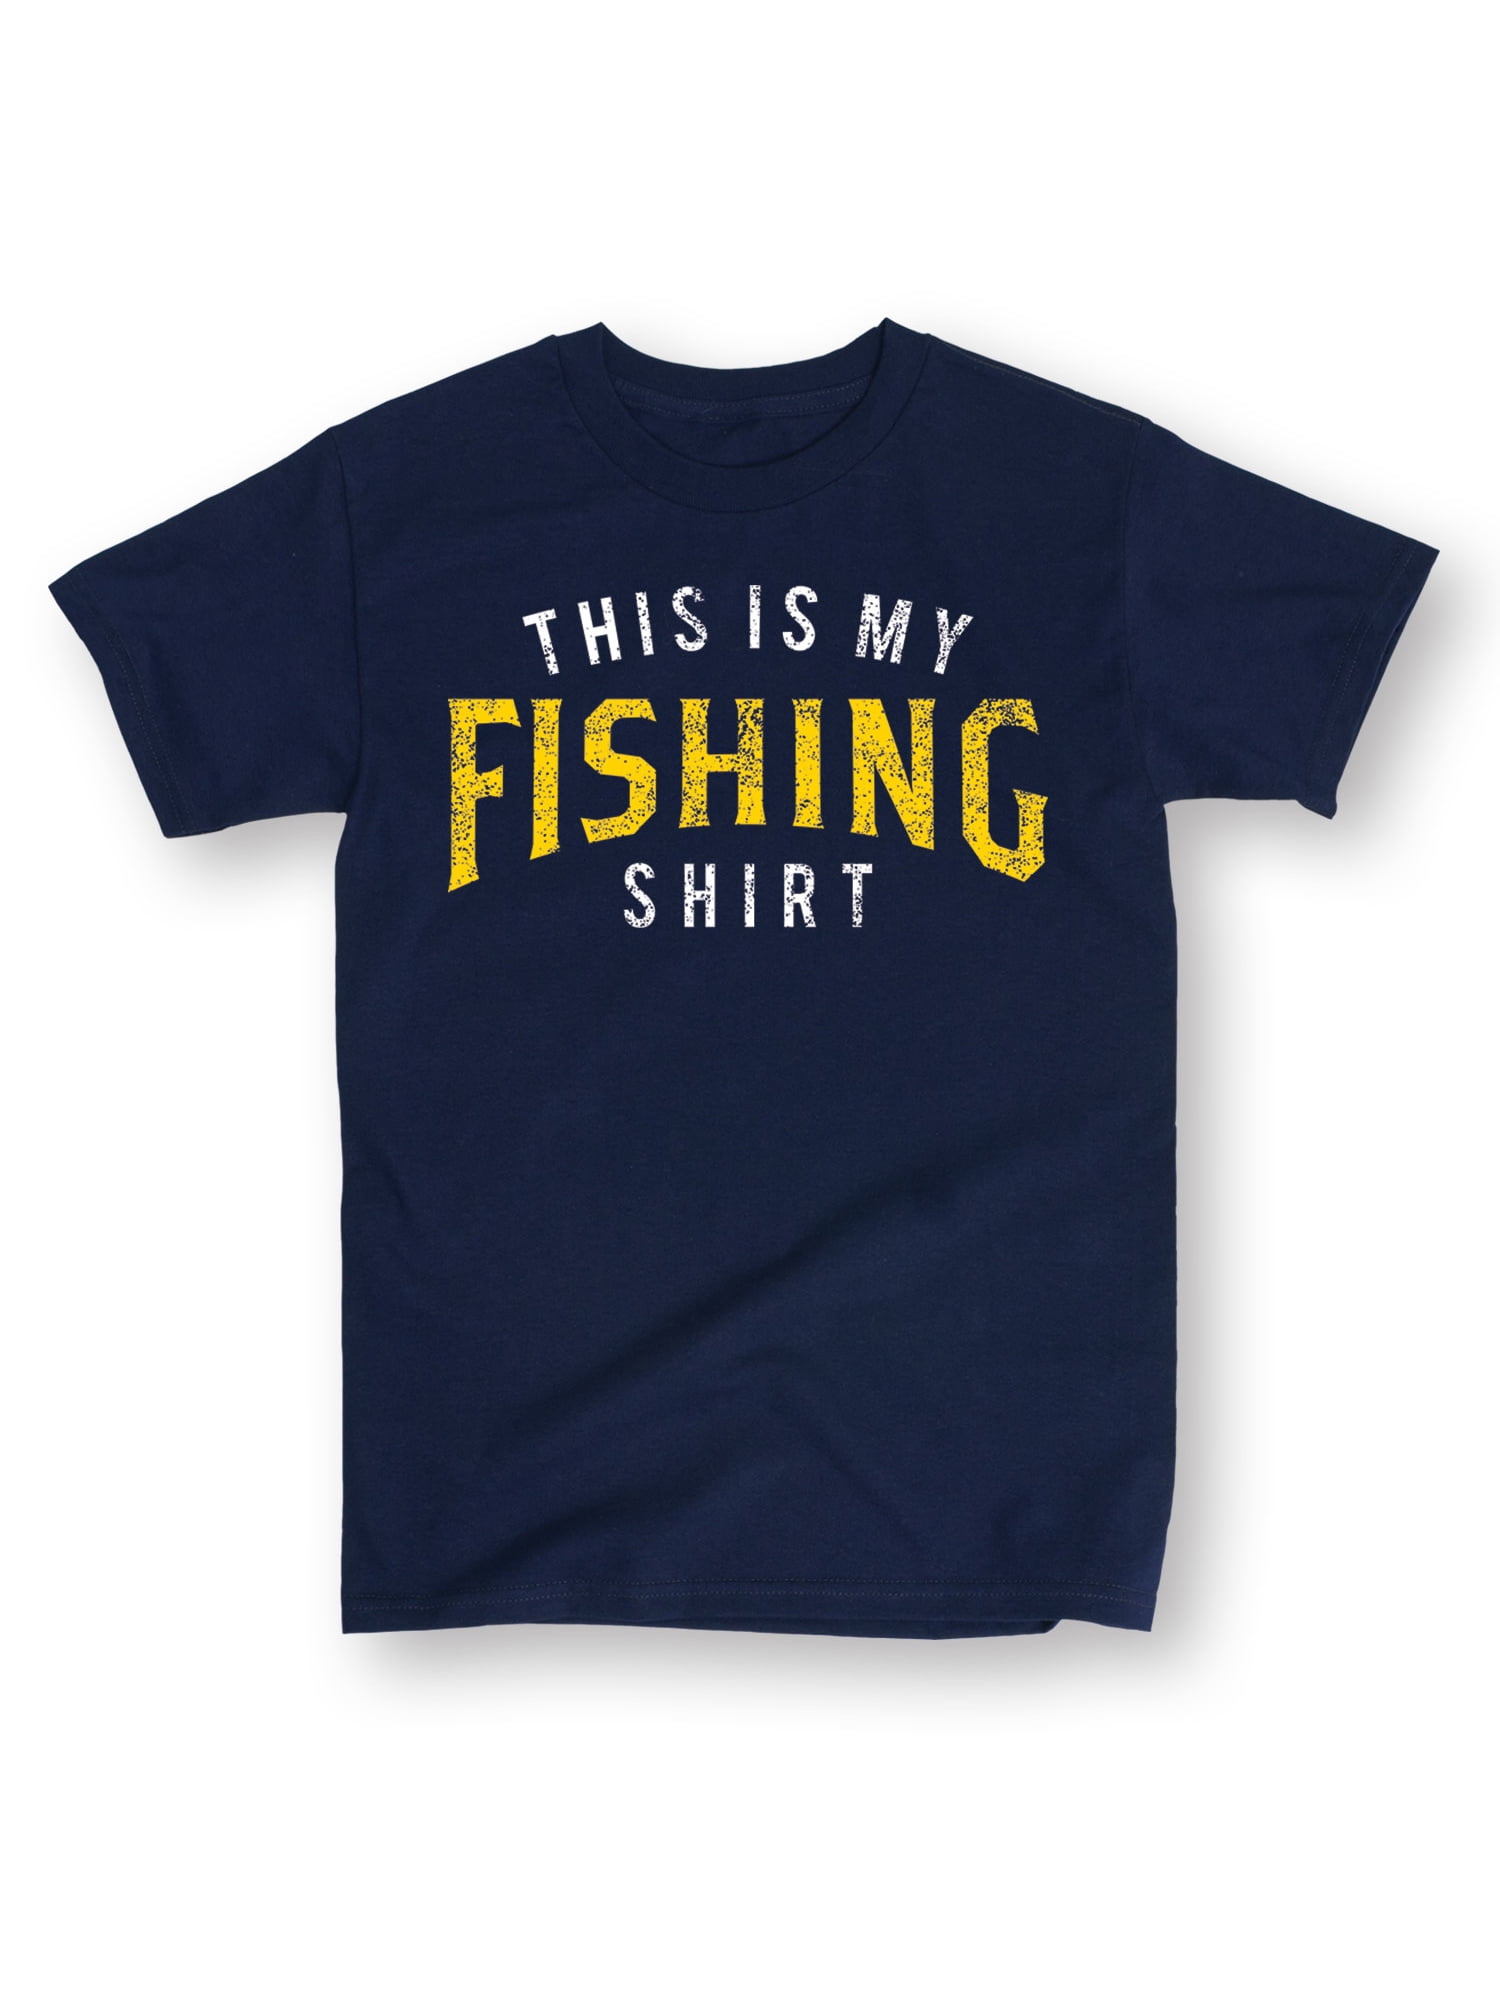 Country Casuals - This Is My Fishing Shirt - Men's Short Sleeve Graphic  T-Shirt